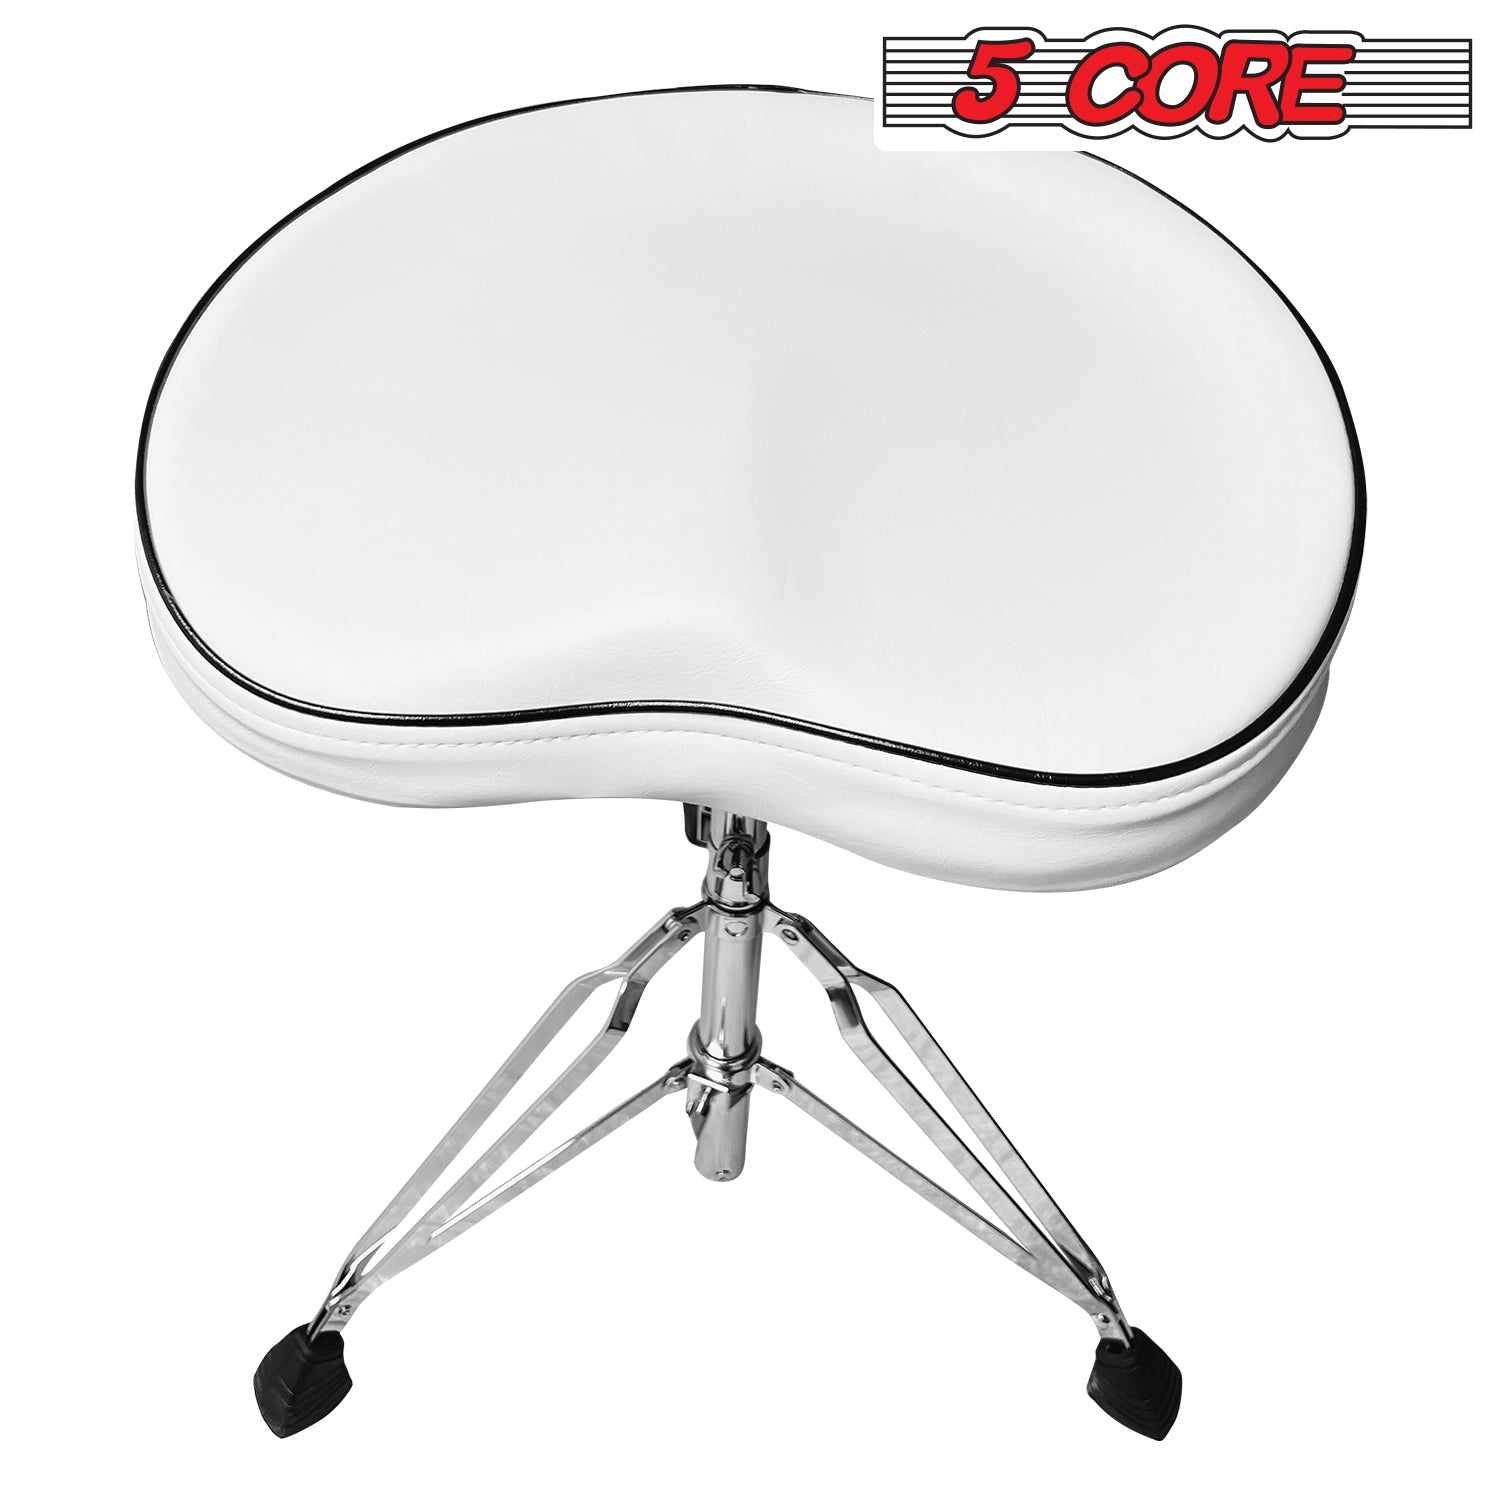 5 Core Drum Throne Thick Padded Comfortable Guitar Stool with Memory Foam Adjustable Padded Keyboard Chair Metal Piano Stool Premium Musician Chair White - DS CH WH SDL